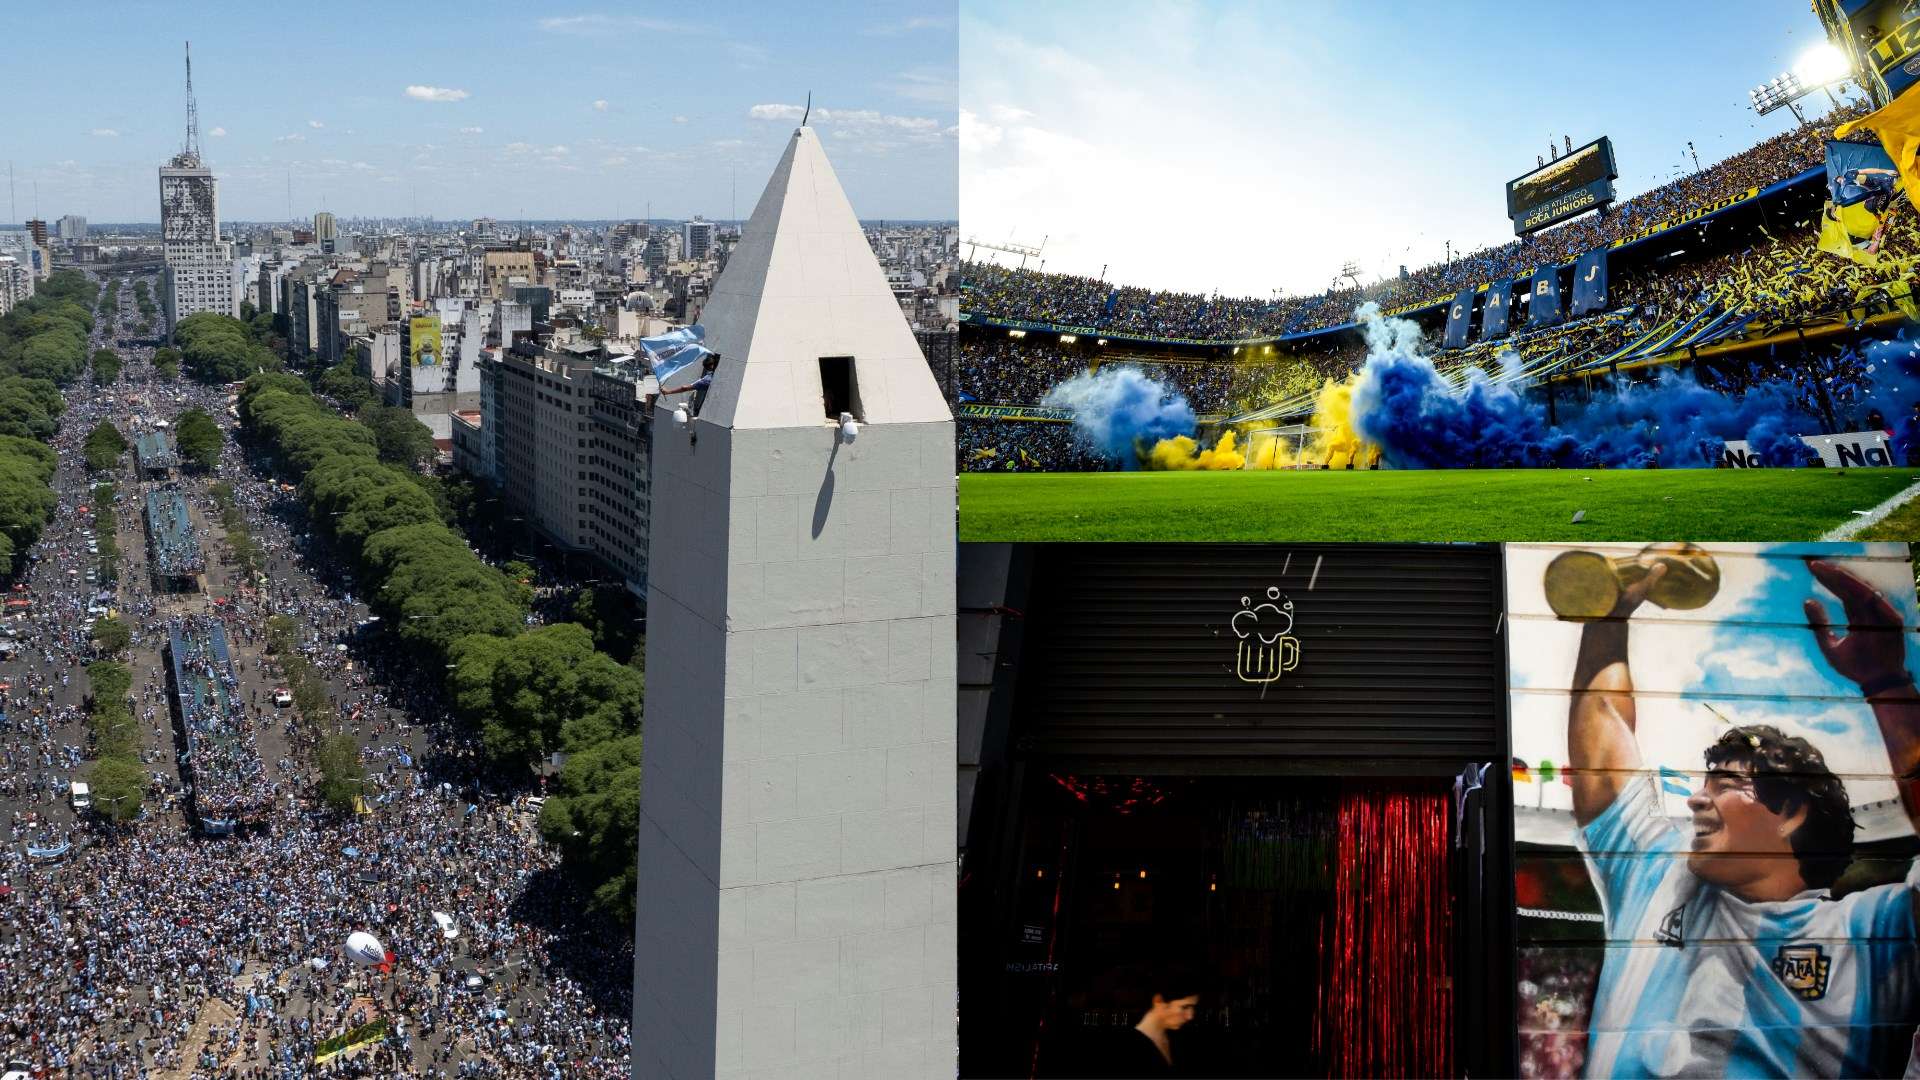 Buenos Aires Soccer Cities guide